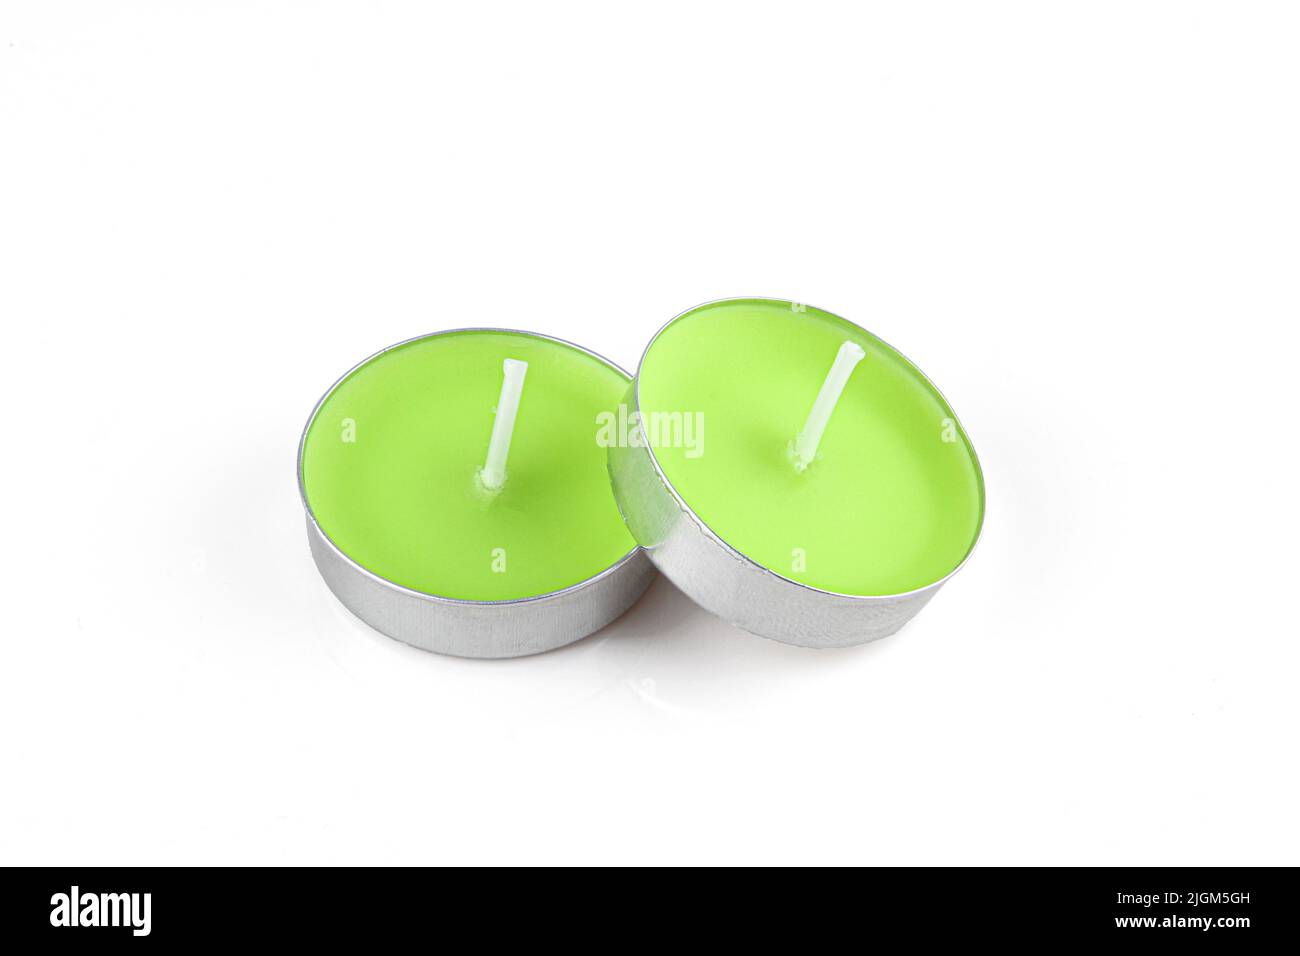 Small unused wax candles isolated on white background. Green decorative object Stock Photo